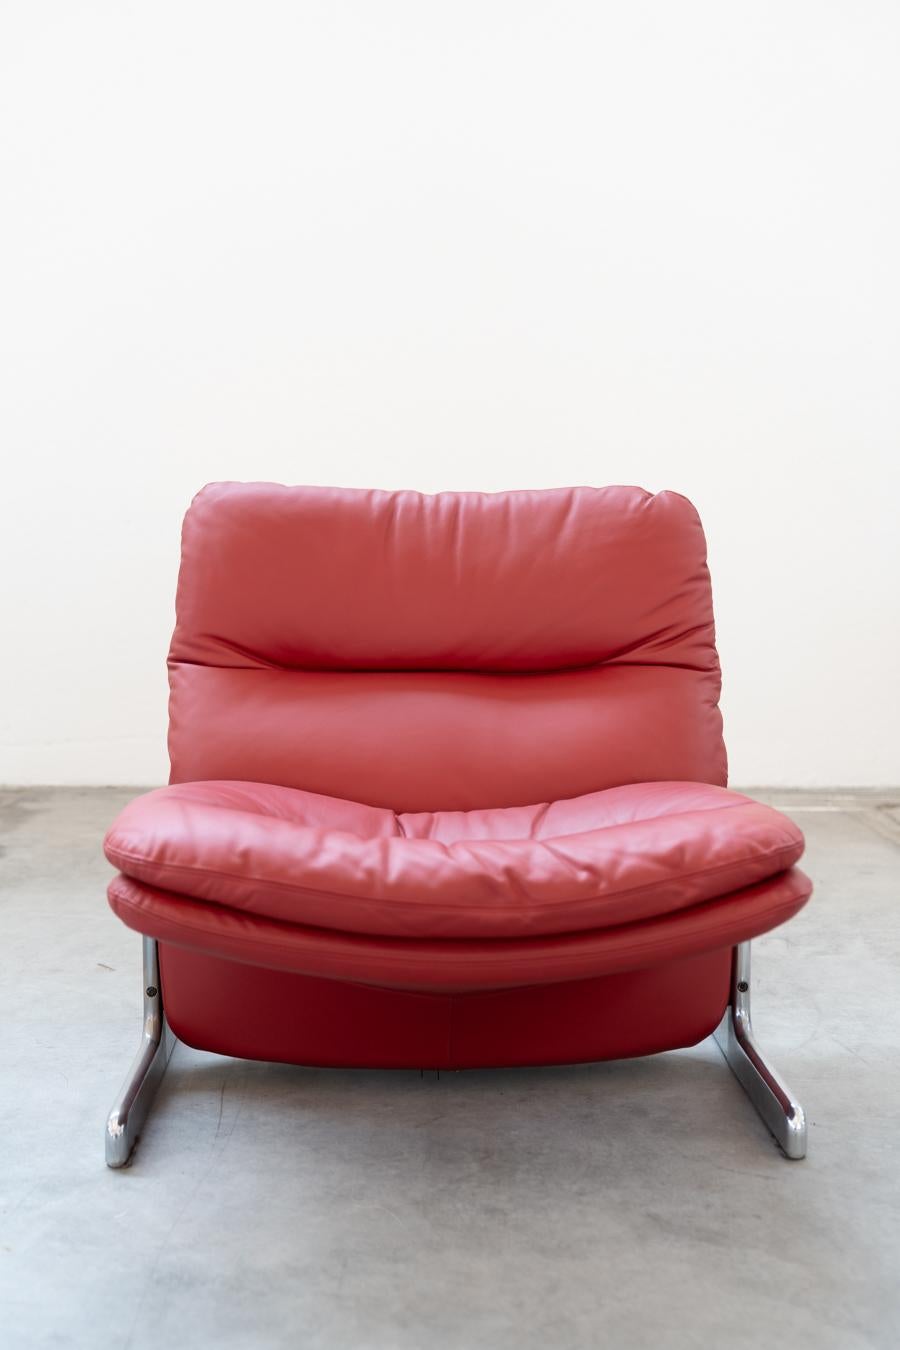 Red leather armchair and footstool, Vitelli and Ammannati, for Brunati 70/80s
Red leather armchair and footstool with T-shaped metal frame, Sandwich model, Giampiero Vitelli and Titina Ammannati for Brunati, 1970
Style
Vintage
Design Period
1980 -